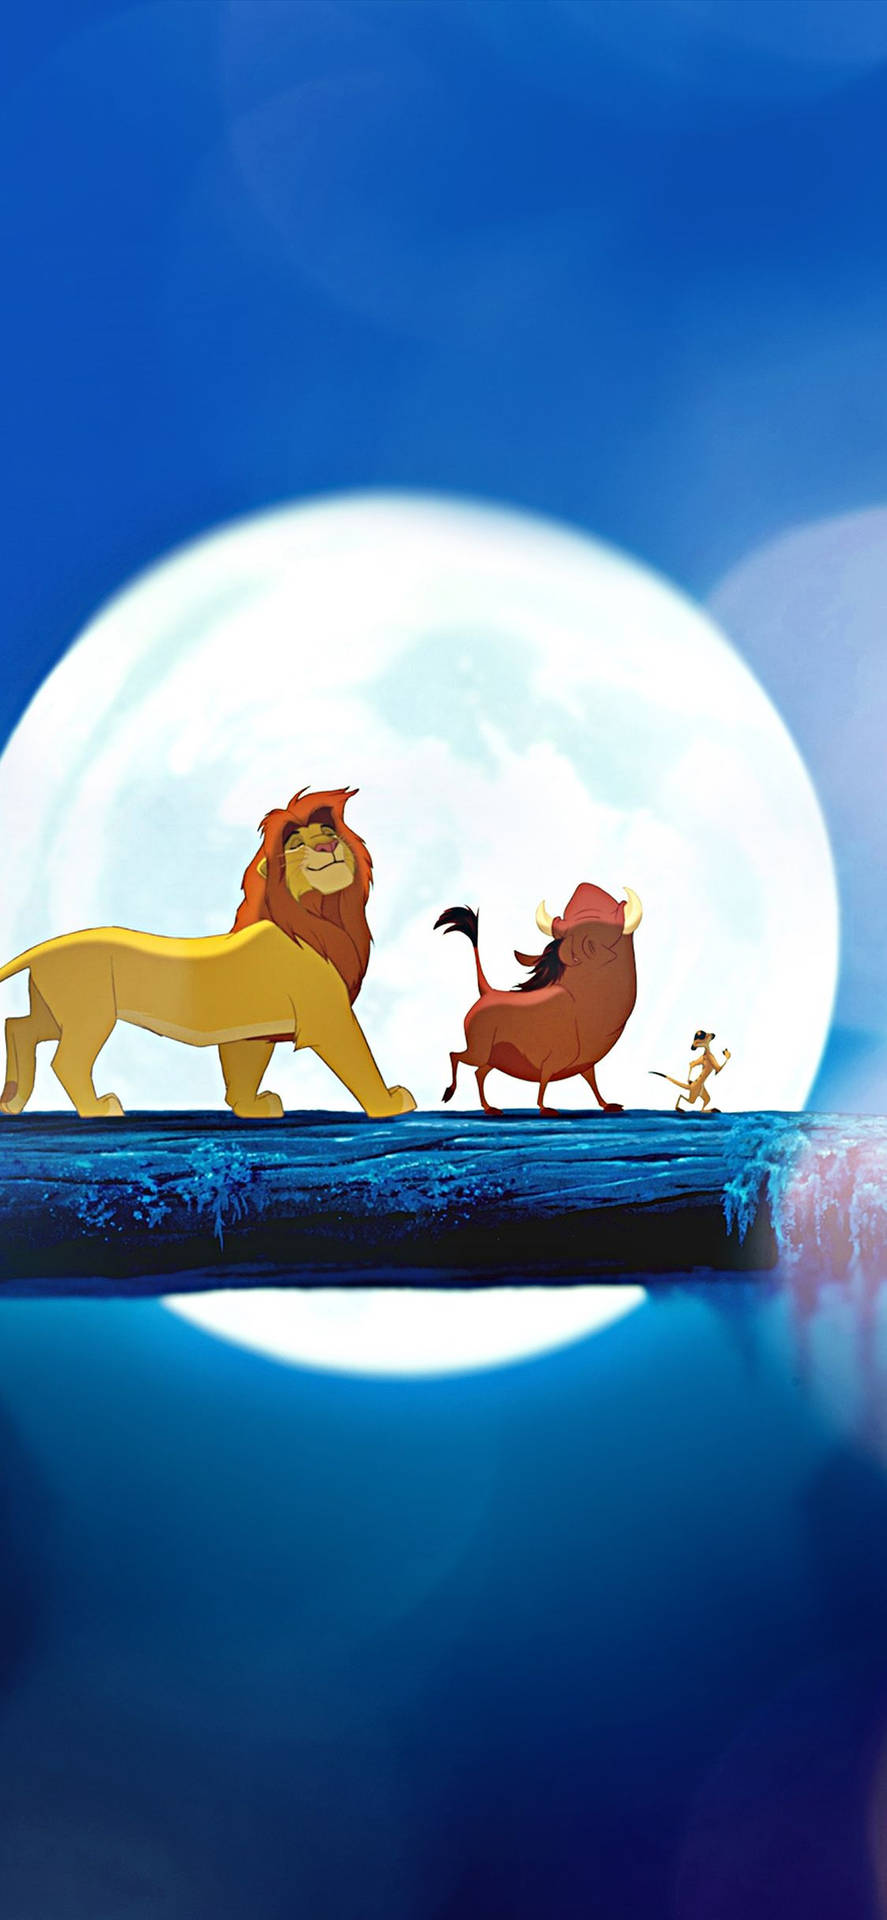 Lion King full moon scene with the trio wallpaper.